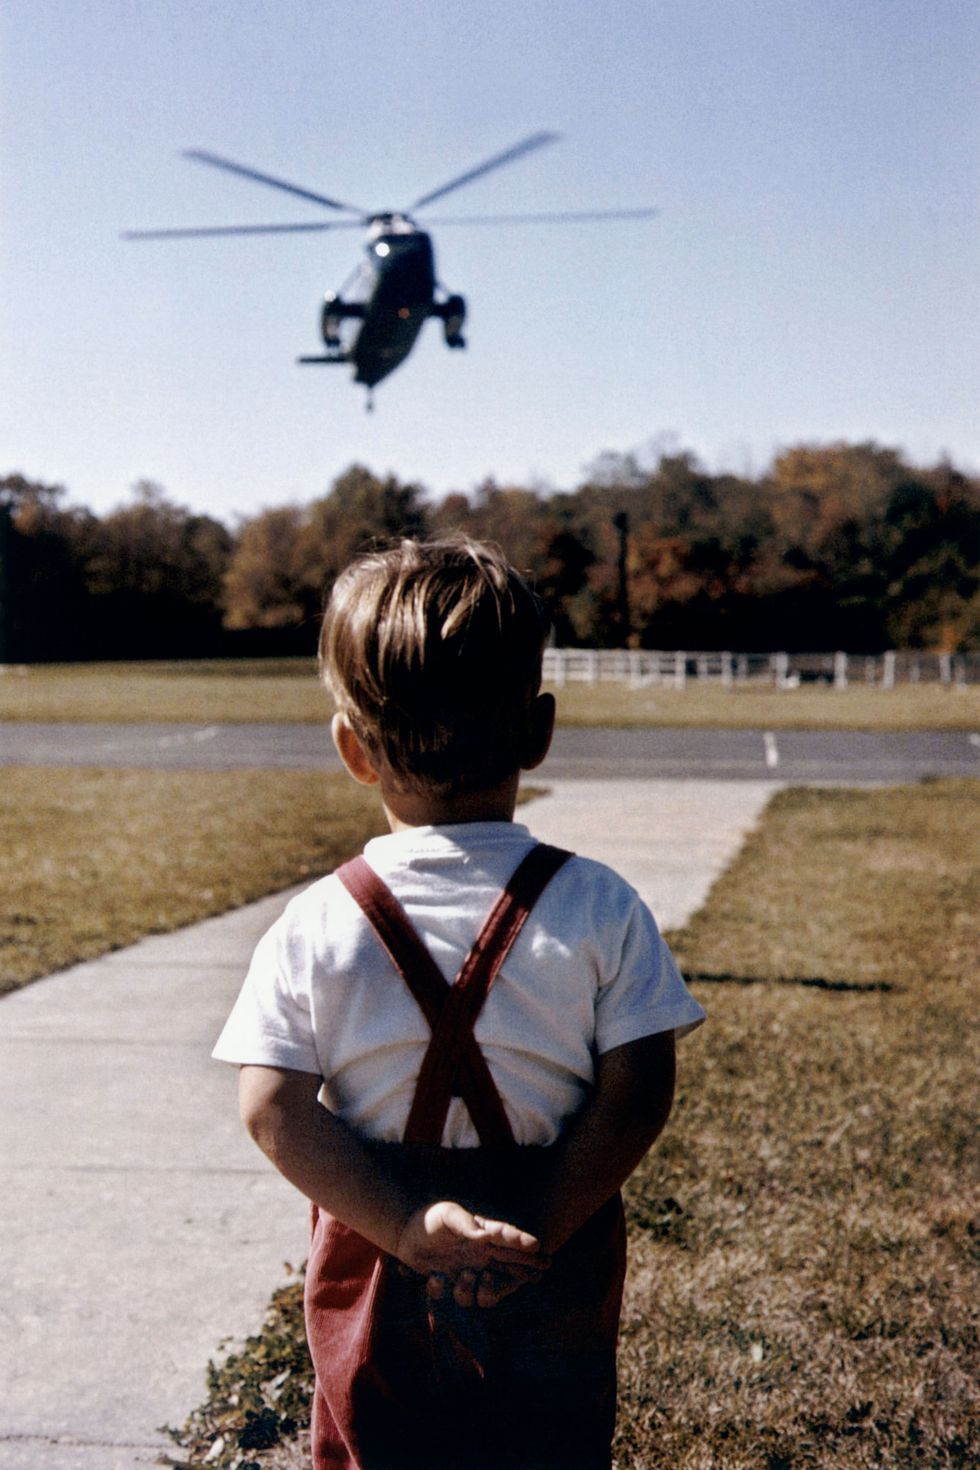 Young John Jr. patiently waiting the helicopter landing and arrival of his father, American President John F. Kennedy.